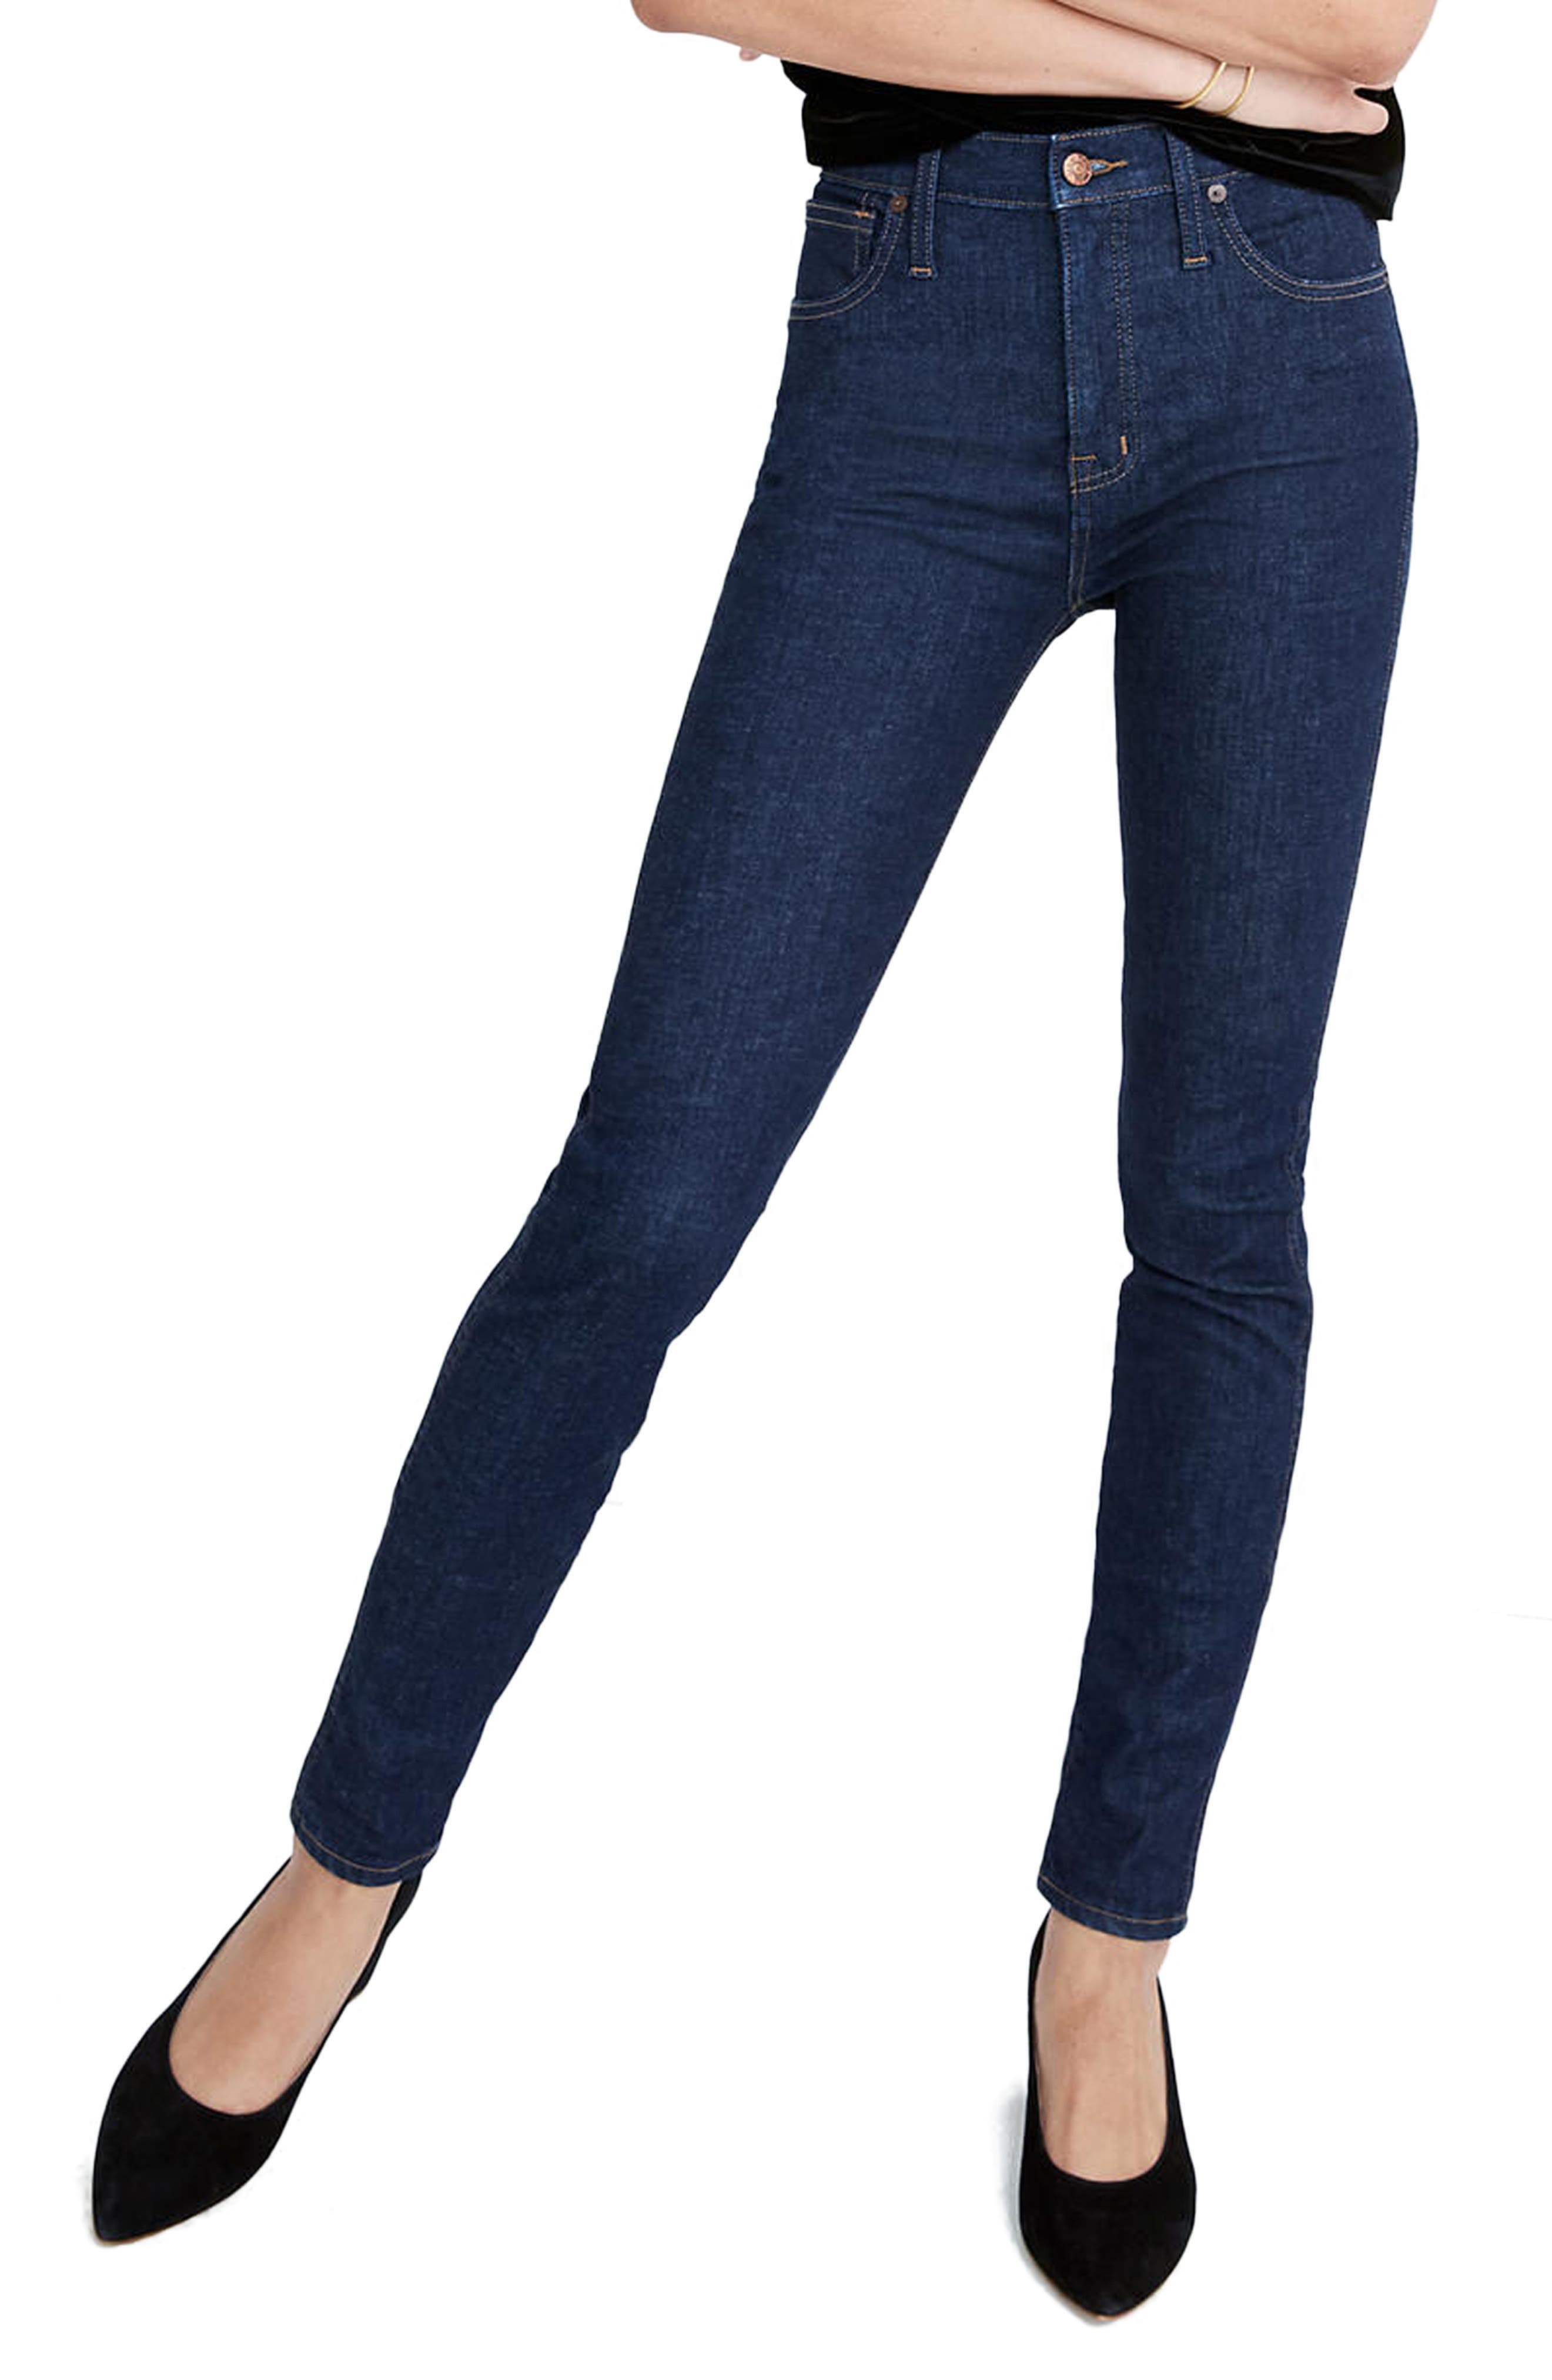 madewell lucille jeans